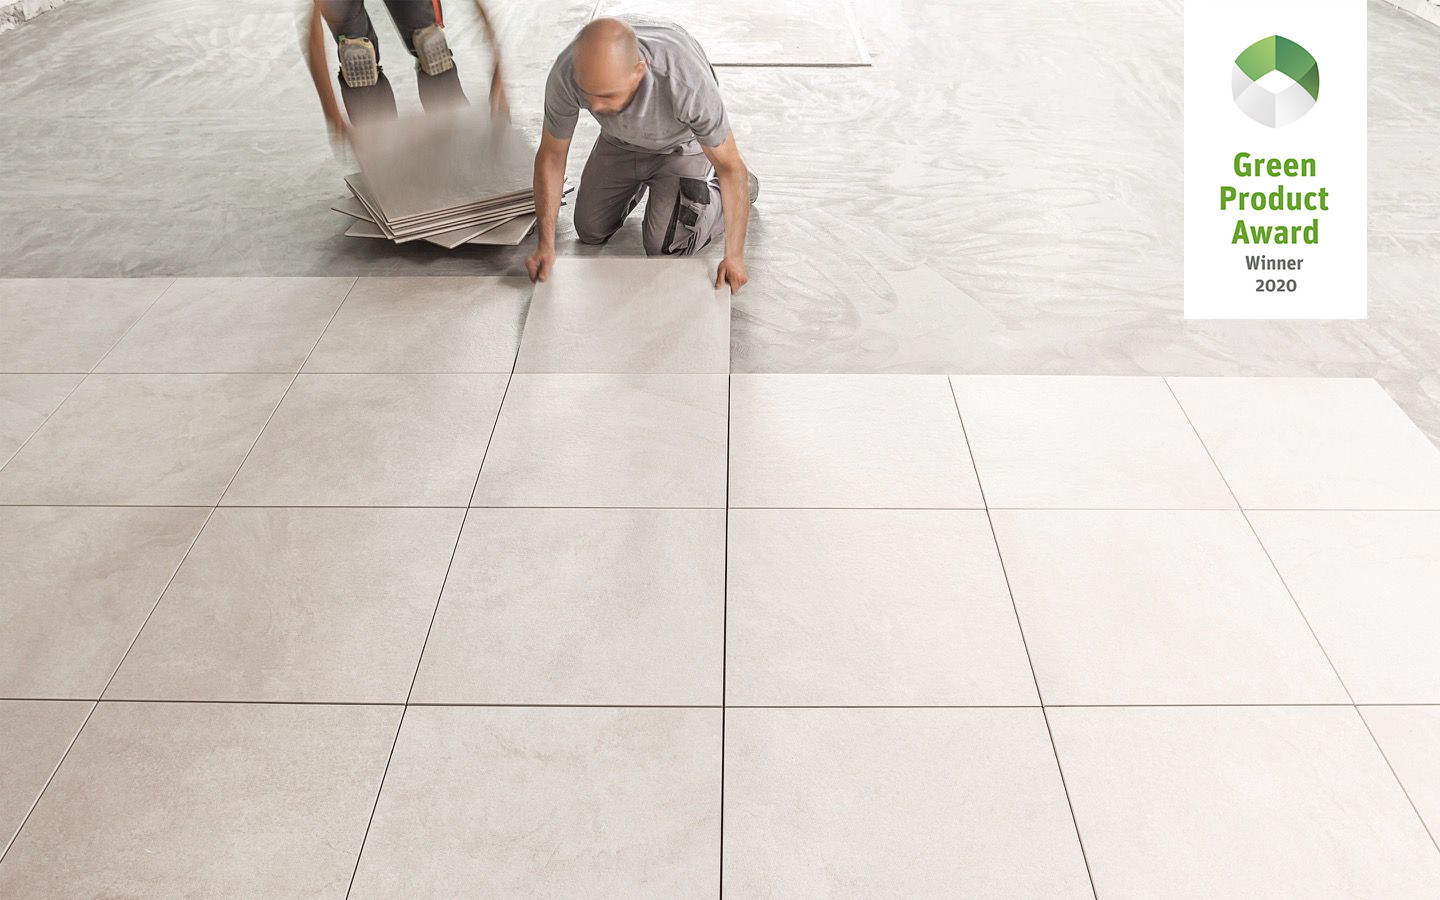 Drytile Green Concept Award, What Kind Of Flooring Can Be Laid Over Ceramic Tile